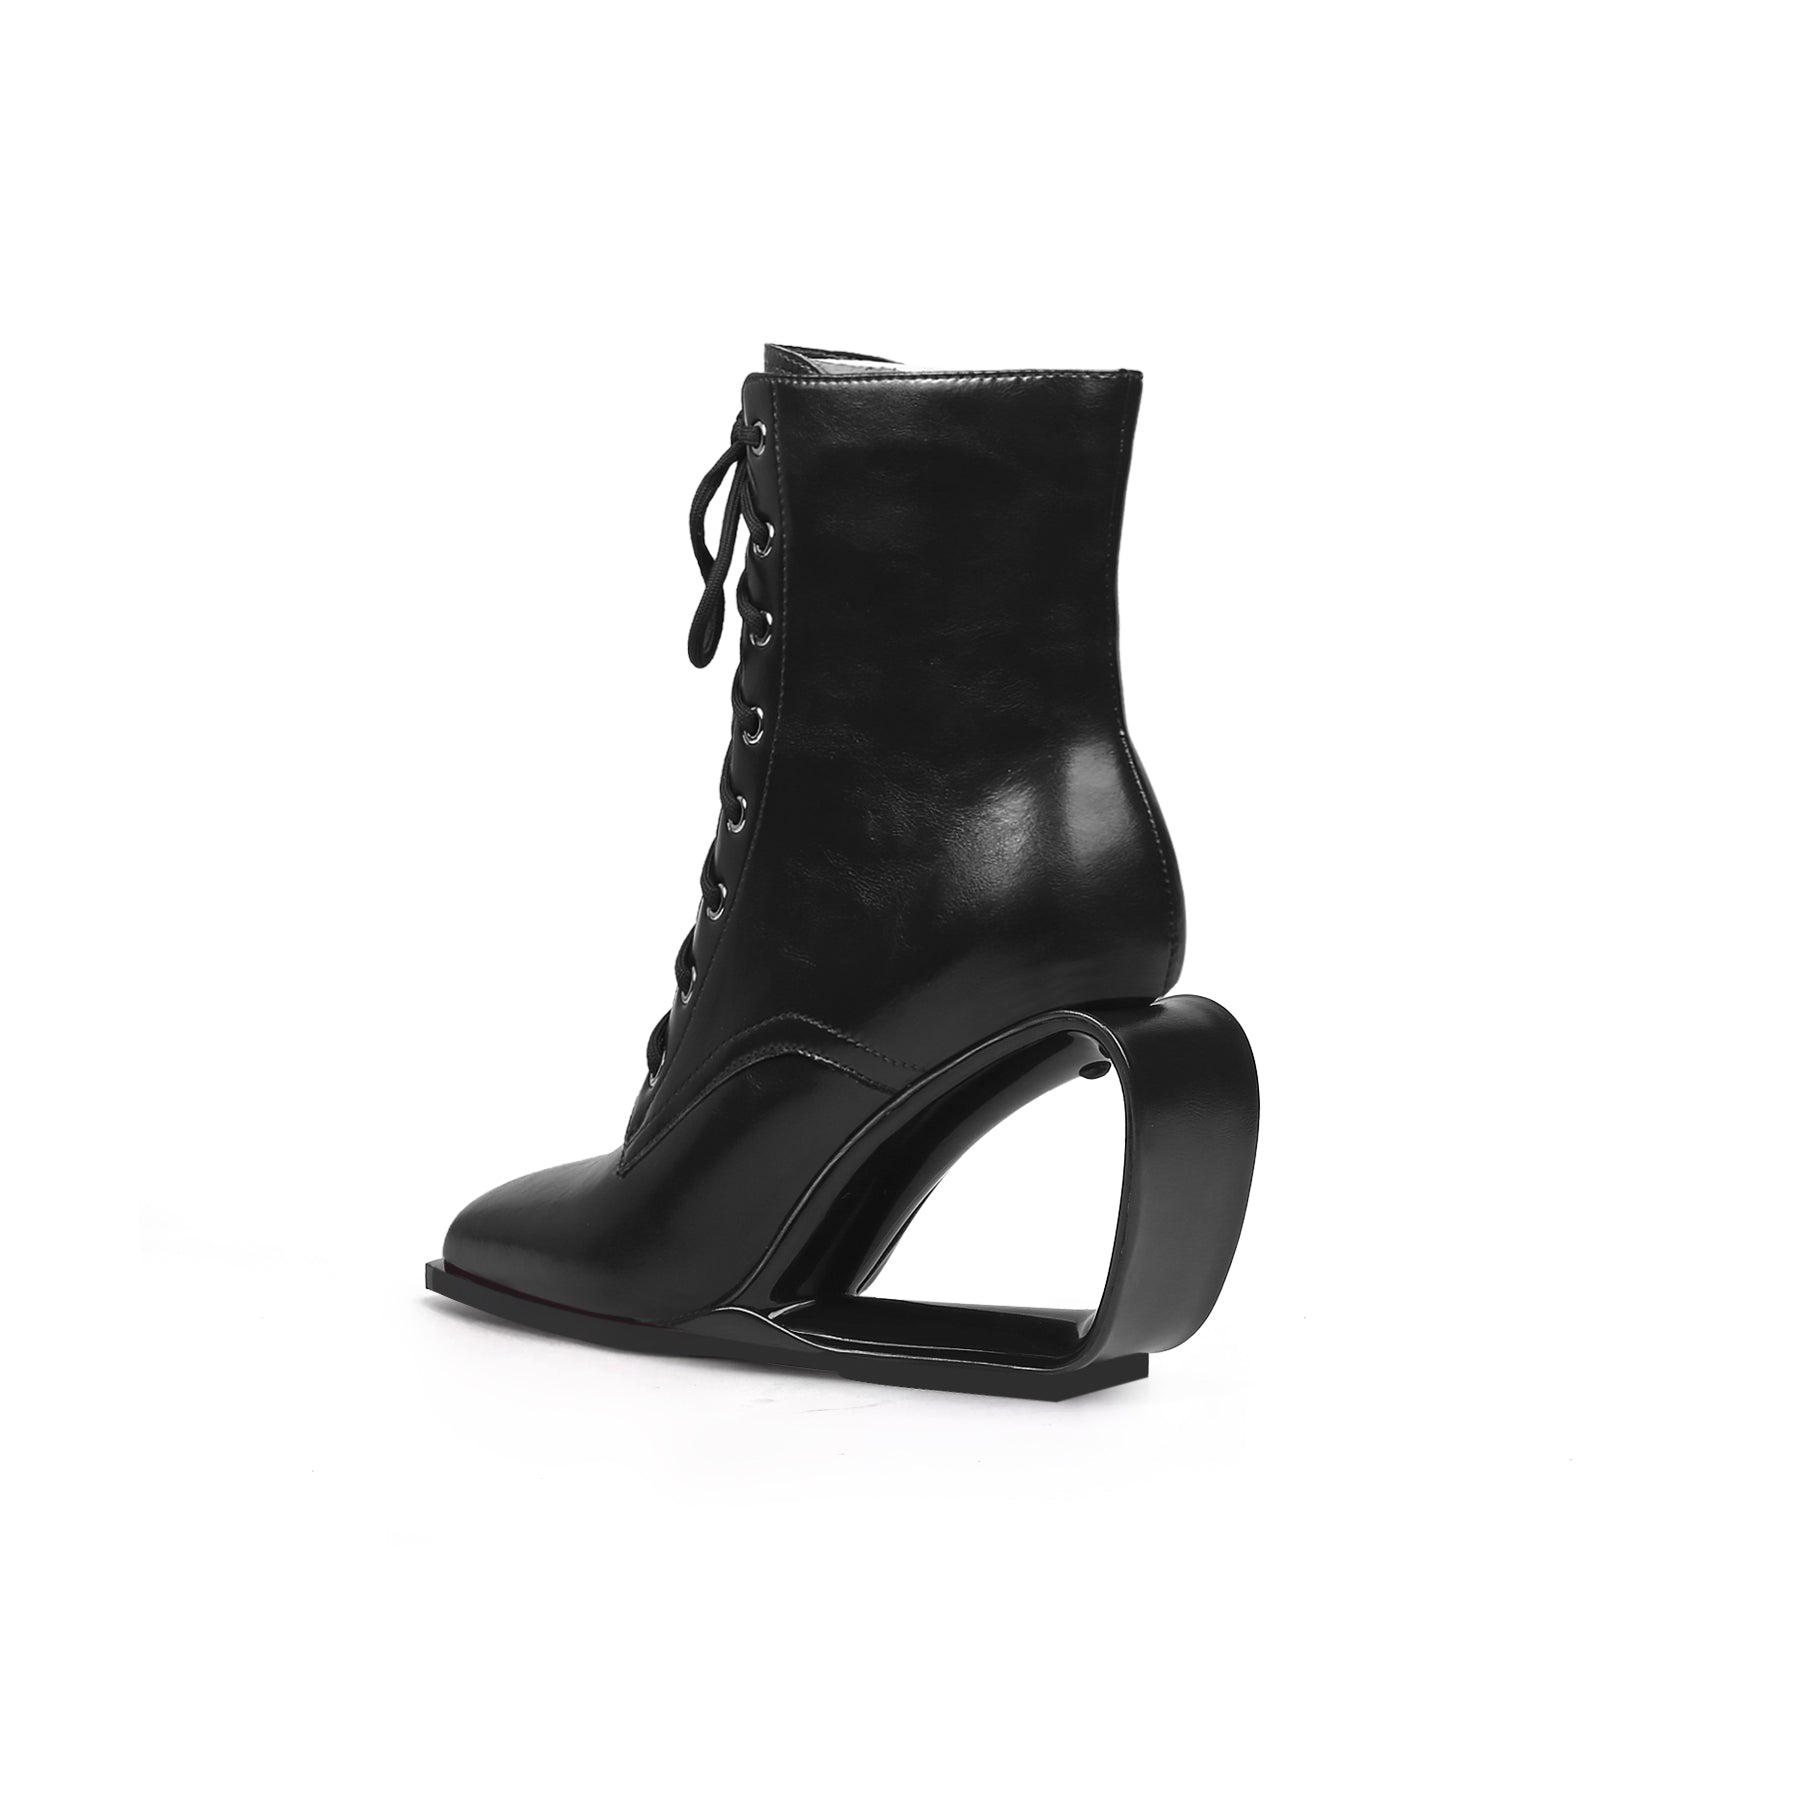 Ballerina Hollow Wedge Lace Up Black Boots - 0cm